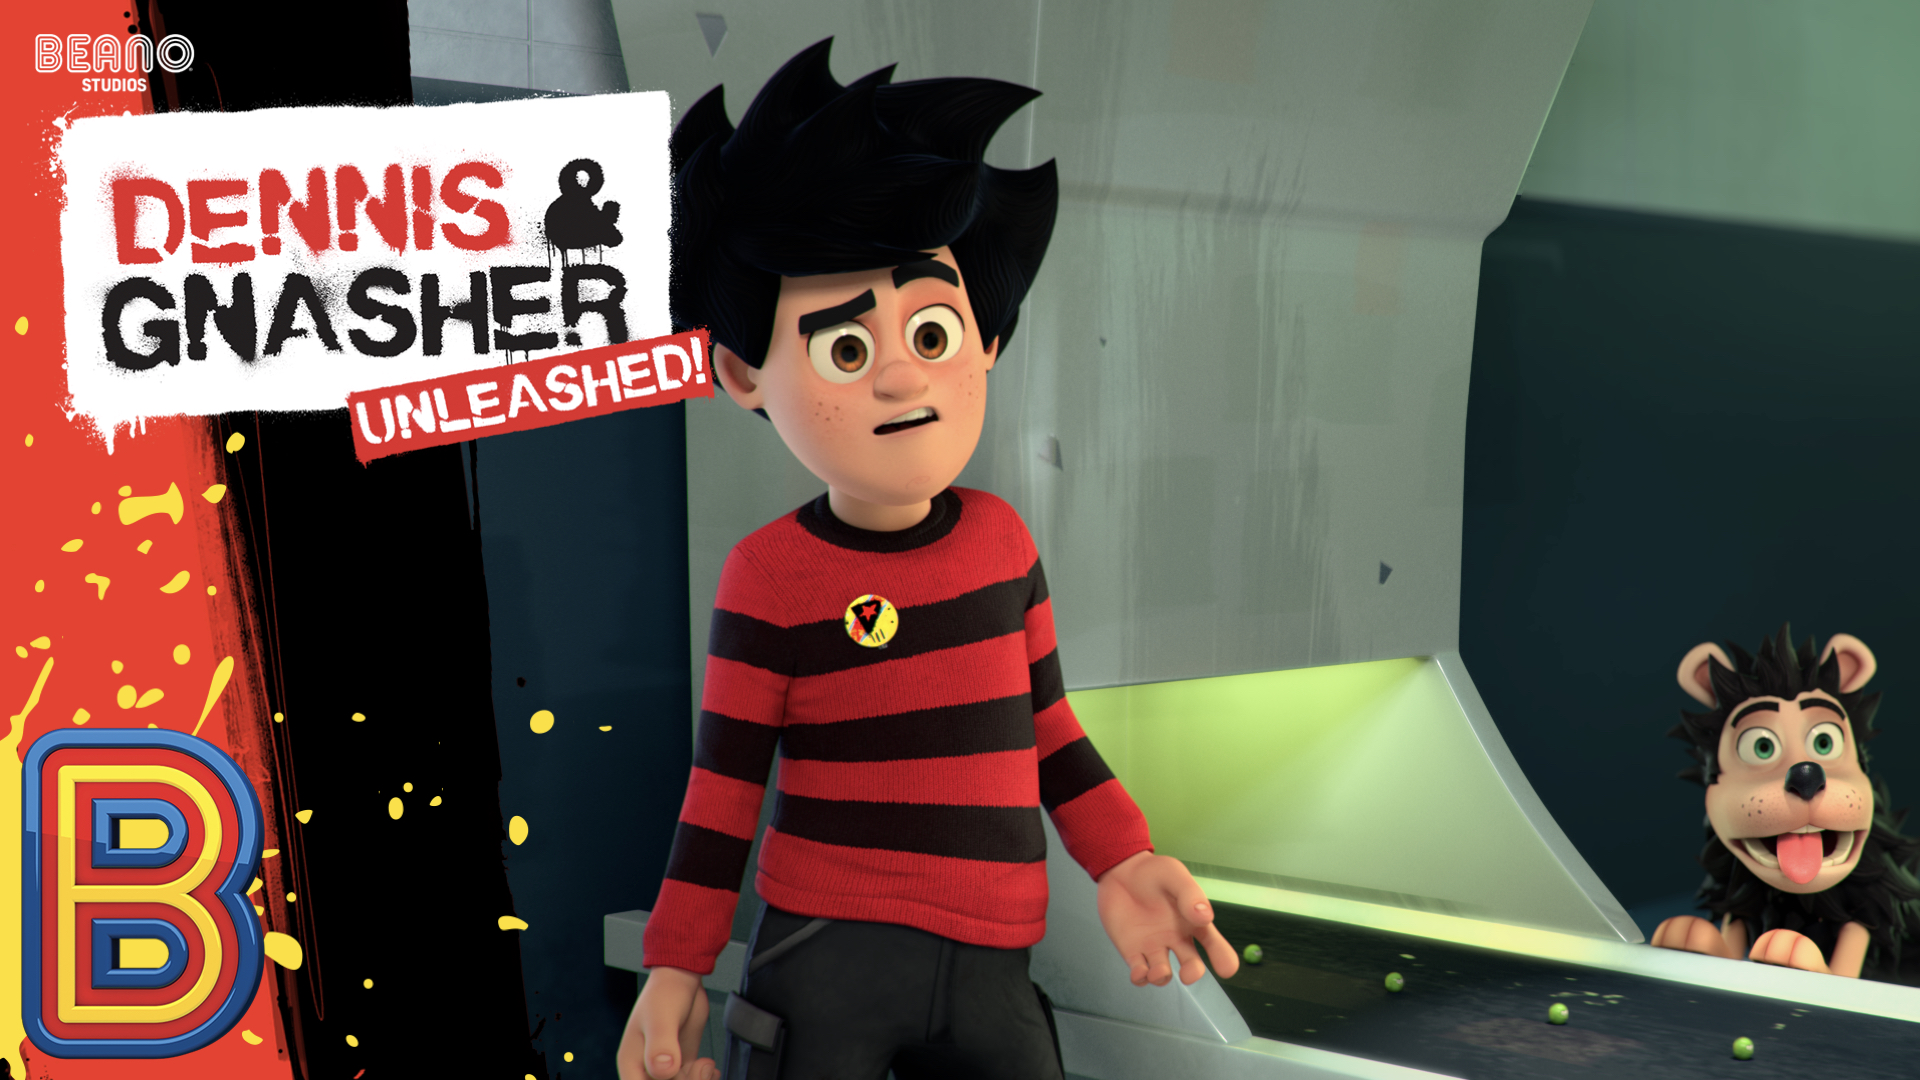 Dennis & Gnasher Unleashed! Episode 11: Give Peas a Chance